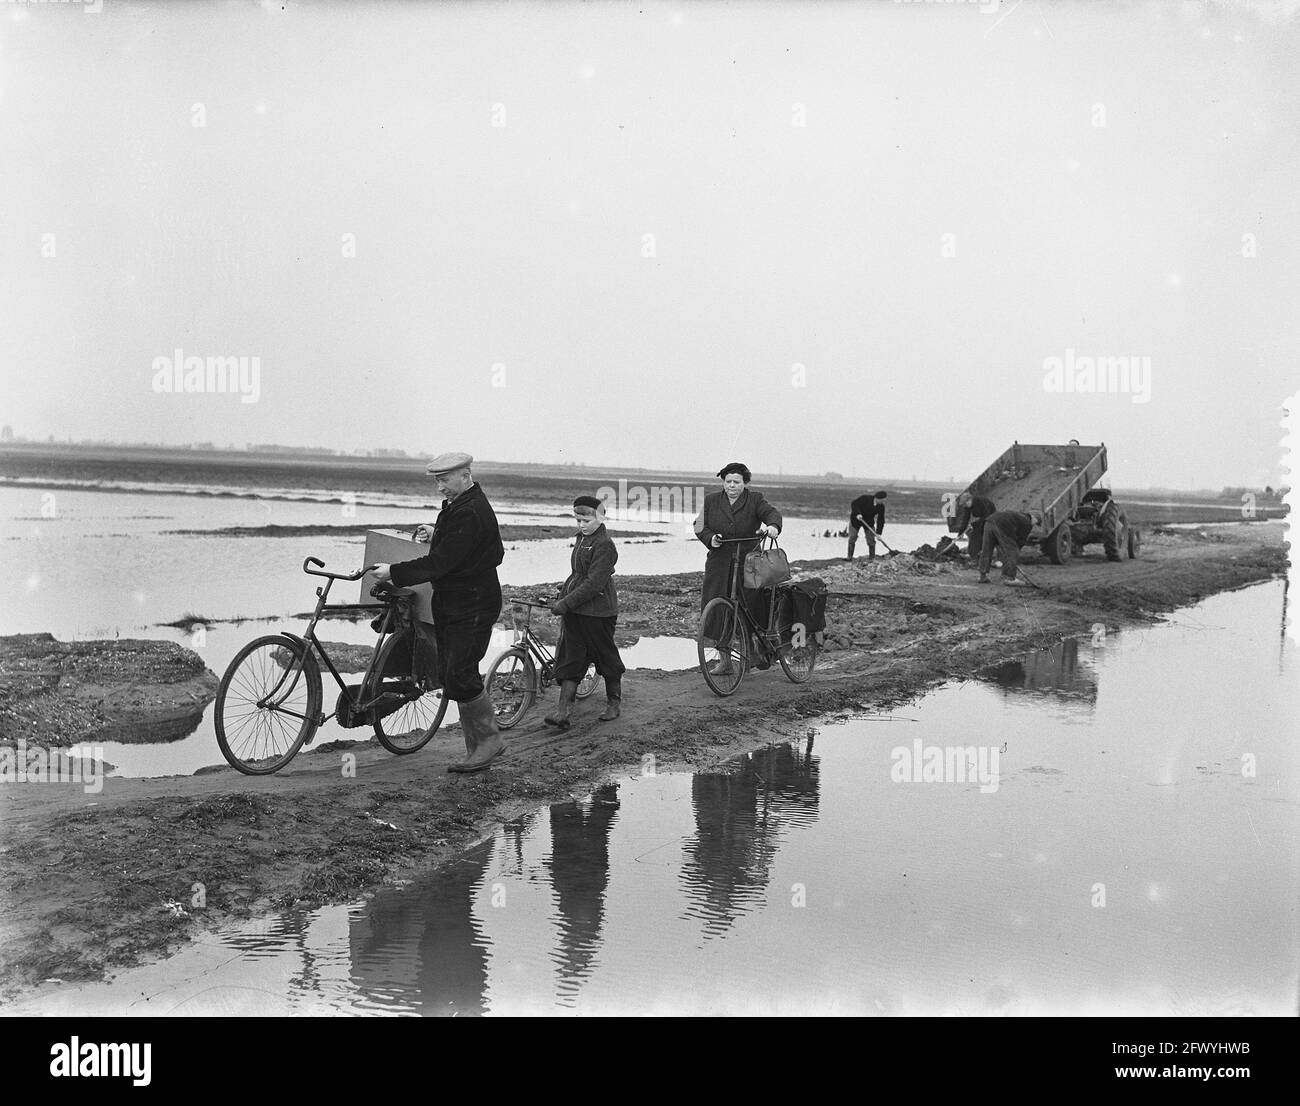 Ouwerkerk freed from isolation after 19 months. The Van Oeveren family on their way back to home in Ouwerkerk on the since a few days dried up and not yet released Molenweg which runs from Stenendijk (Zierikzee) to Ouwerkerk, December 21, 1953, families, floods, flood, The Netherlands, 20th century press agency photo, news to remember, documentary, historic photography 1945-1990, visual stories, human history of the Twentieth Century, capturing moments in time Stock Photo